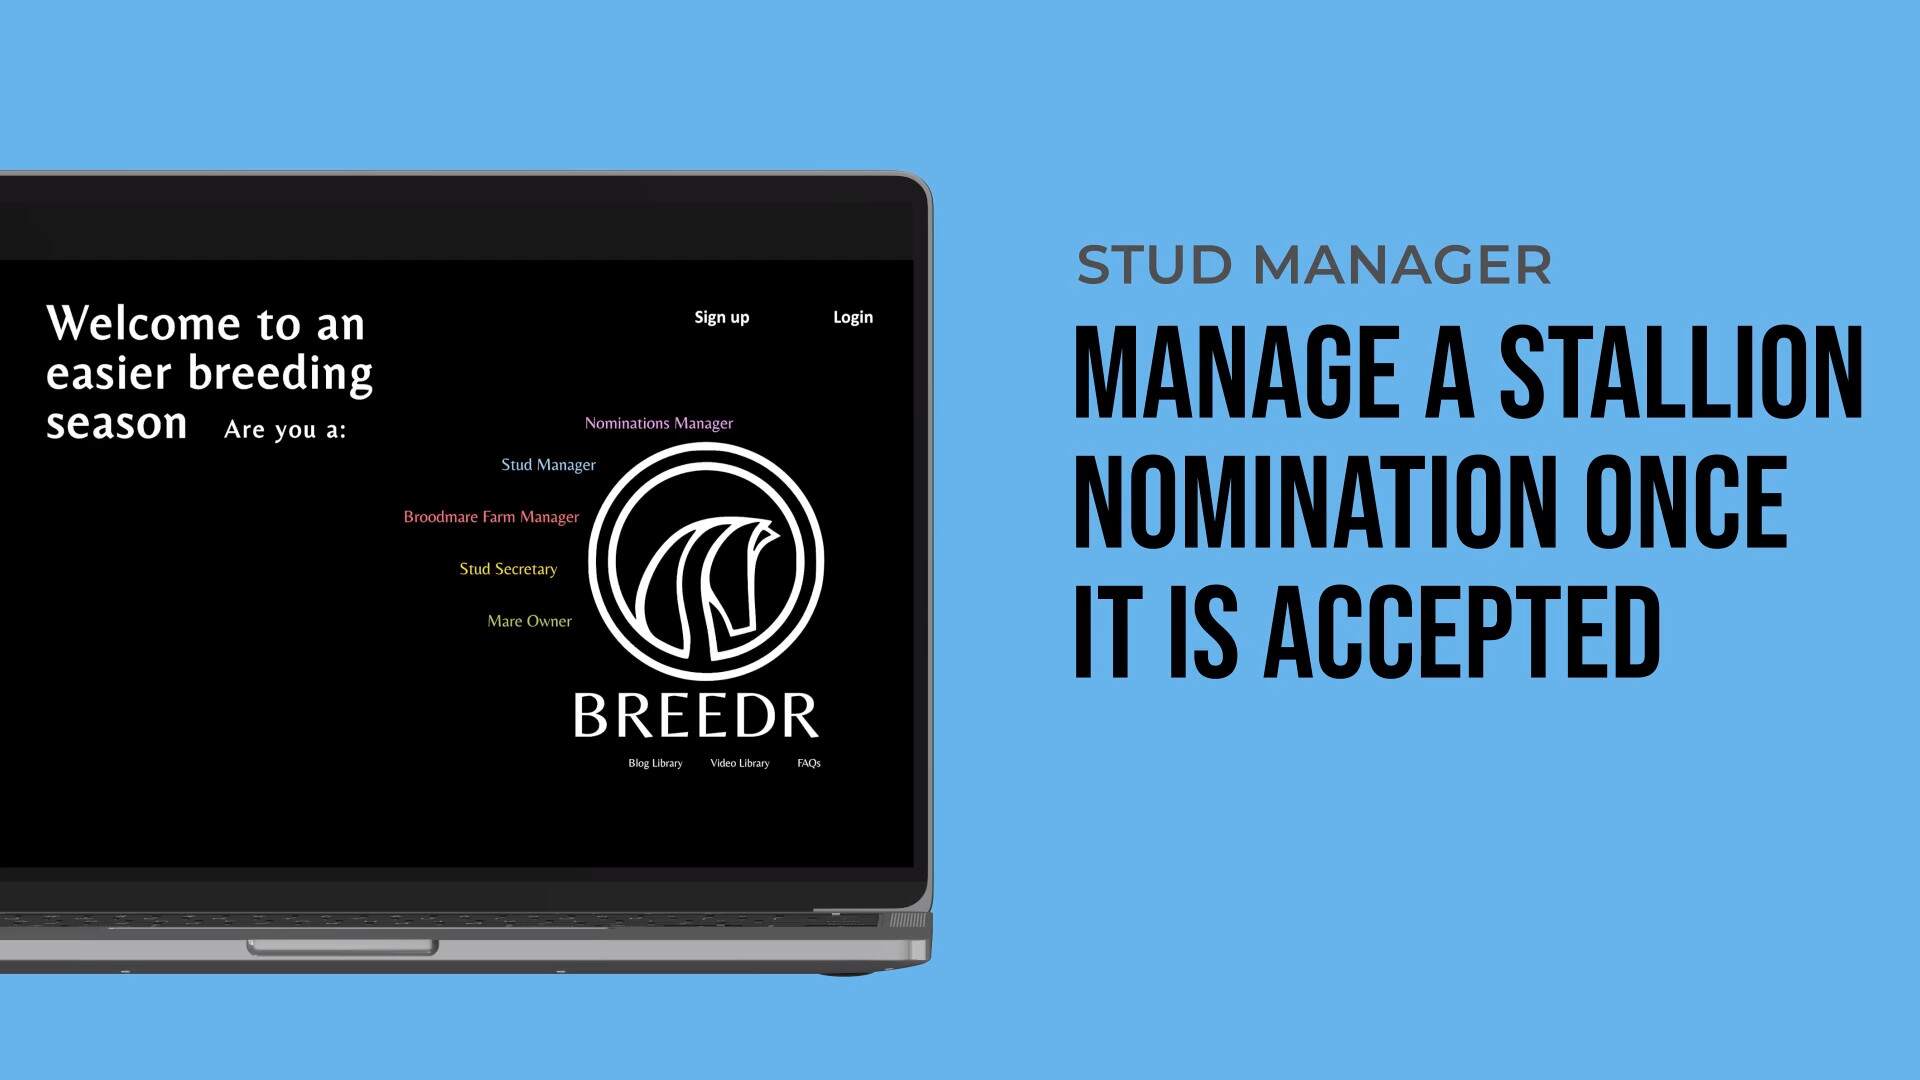 Stud manager Manage a Stallion nomination once accepted